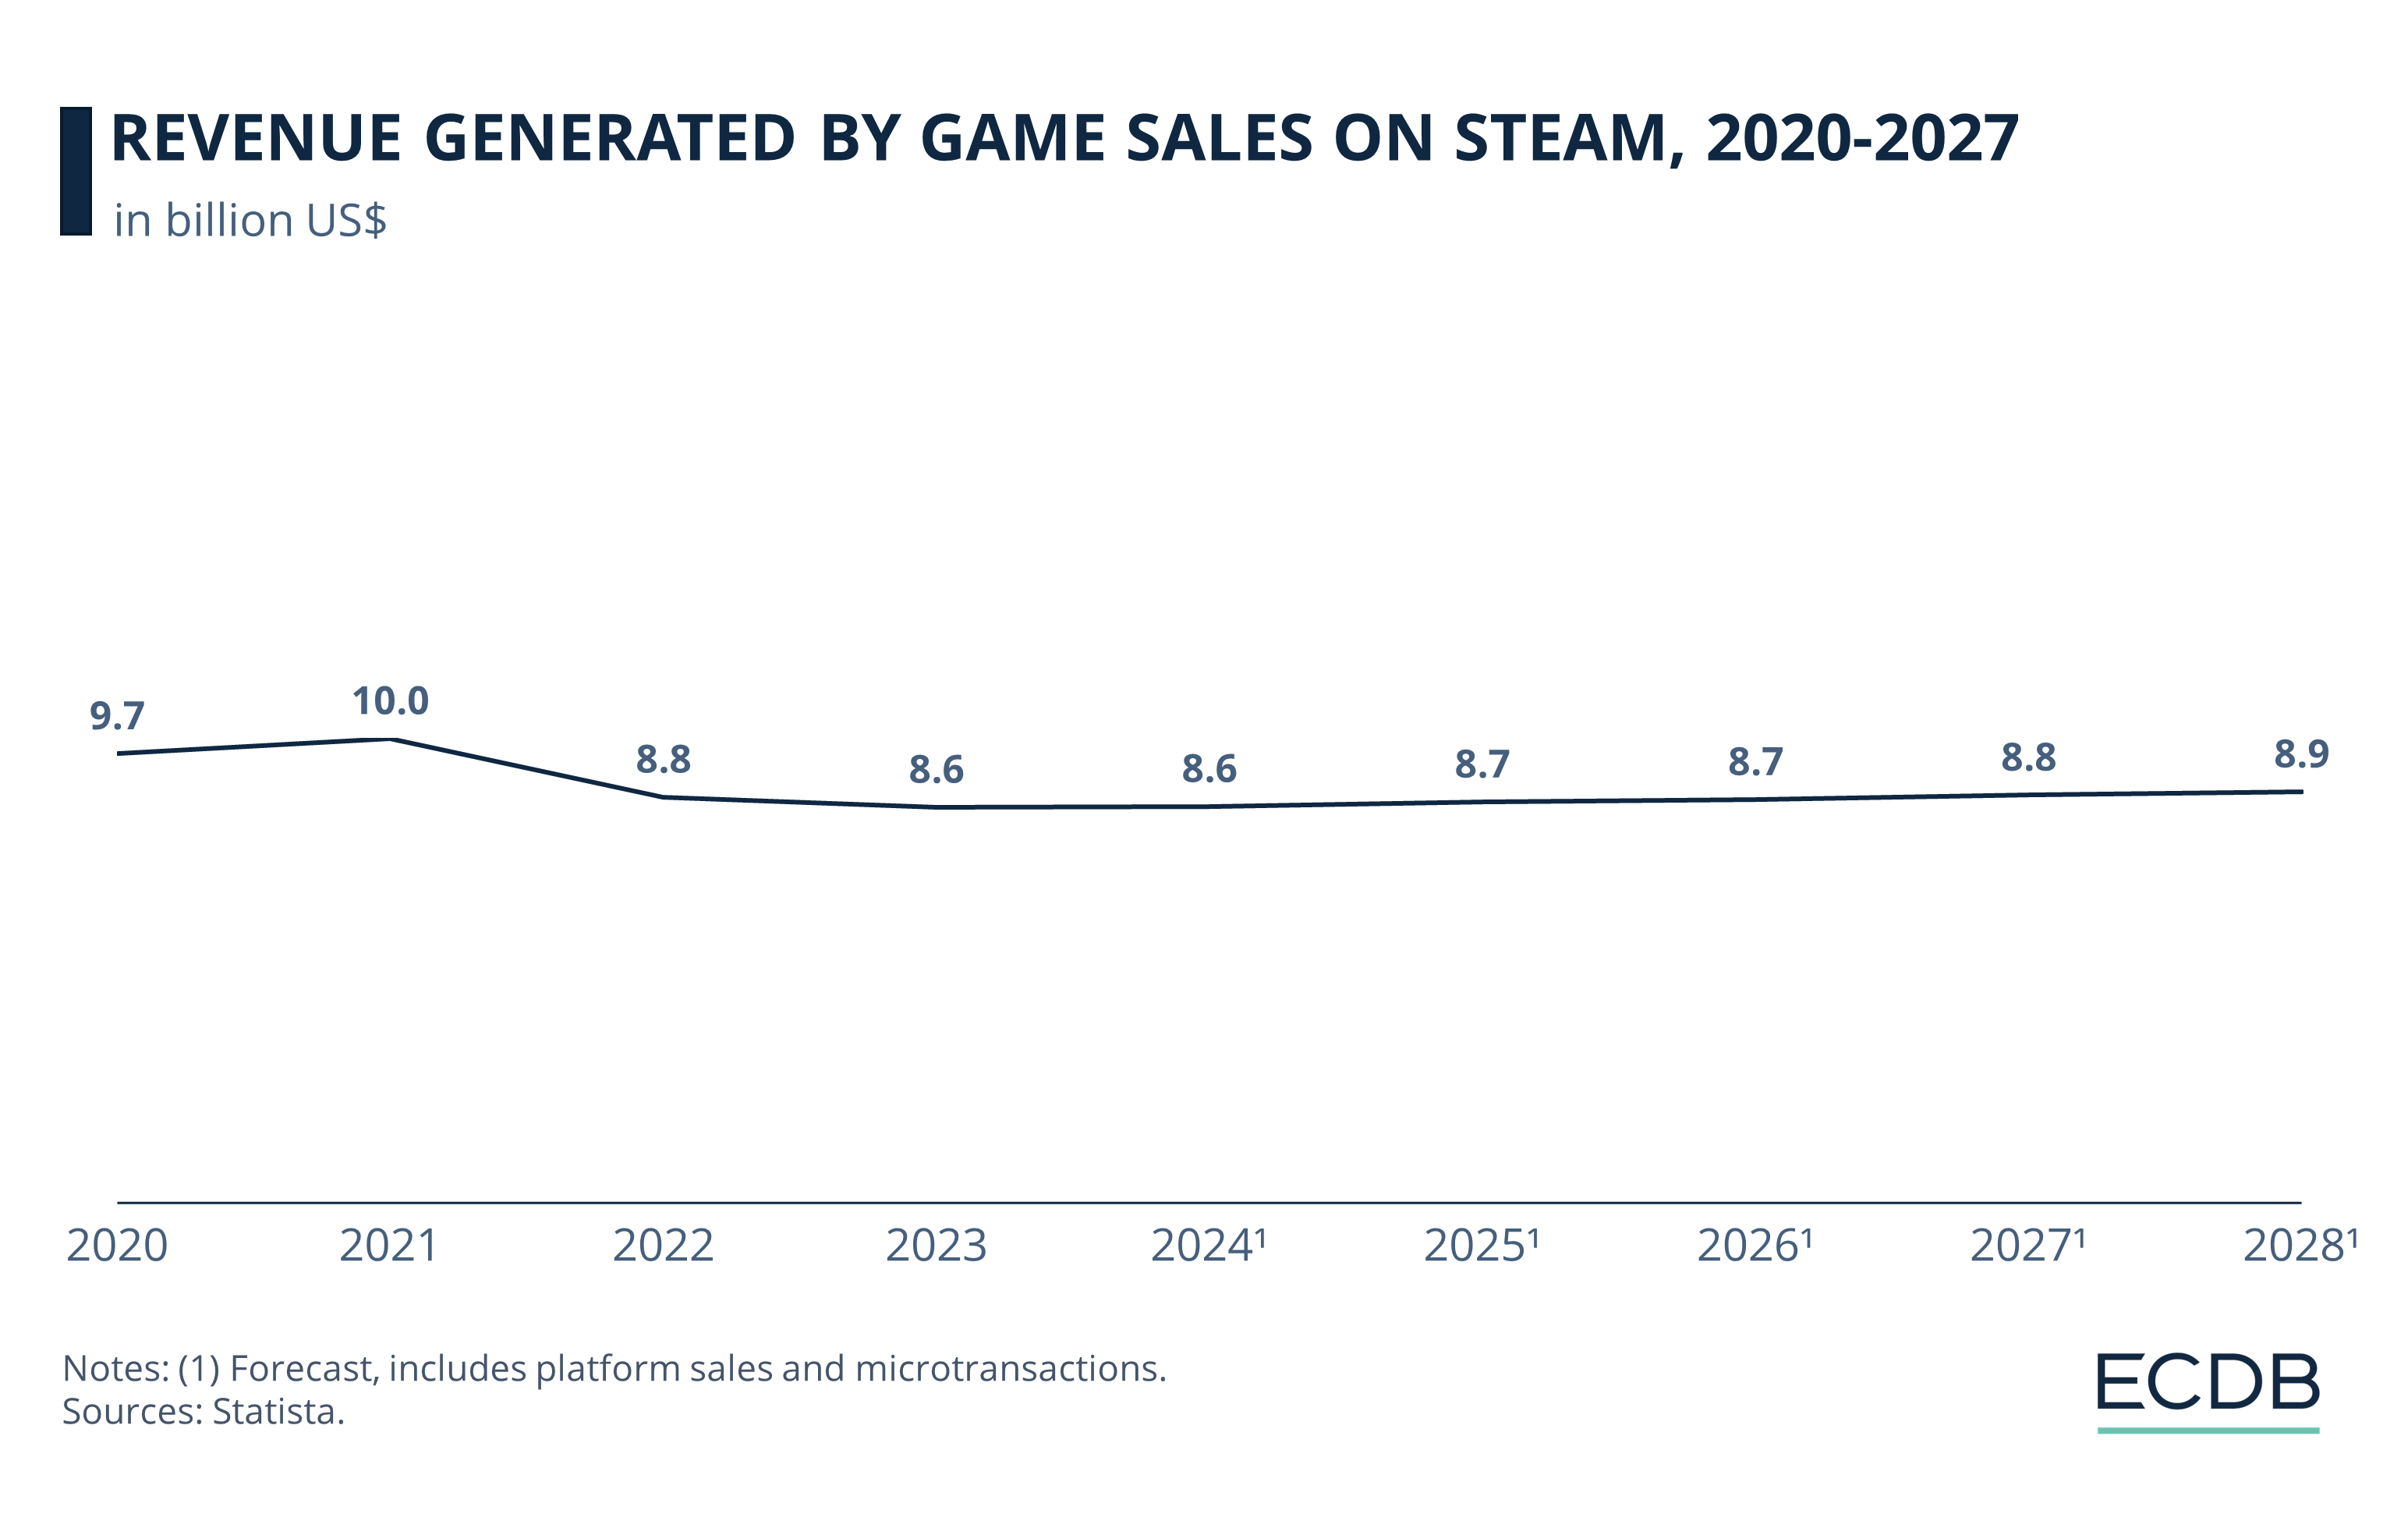 Revenue Generated by Game Sales on Steam, 2020-2027